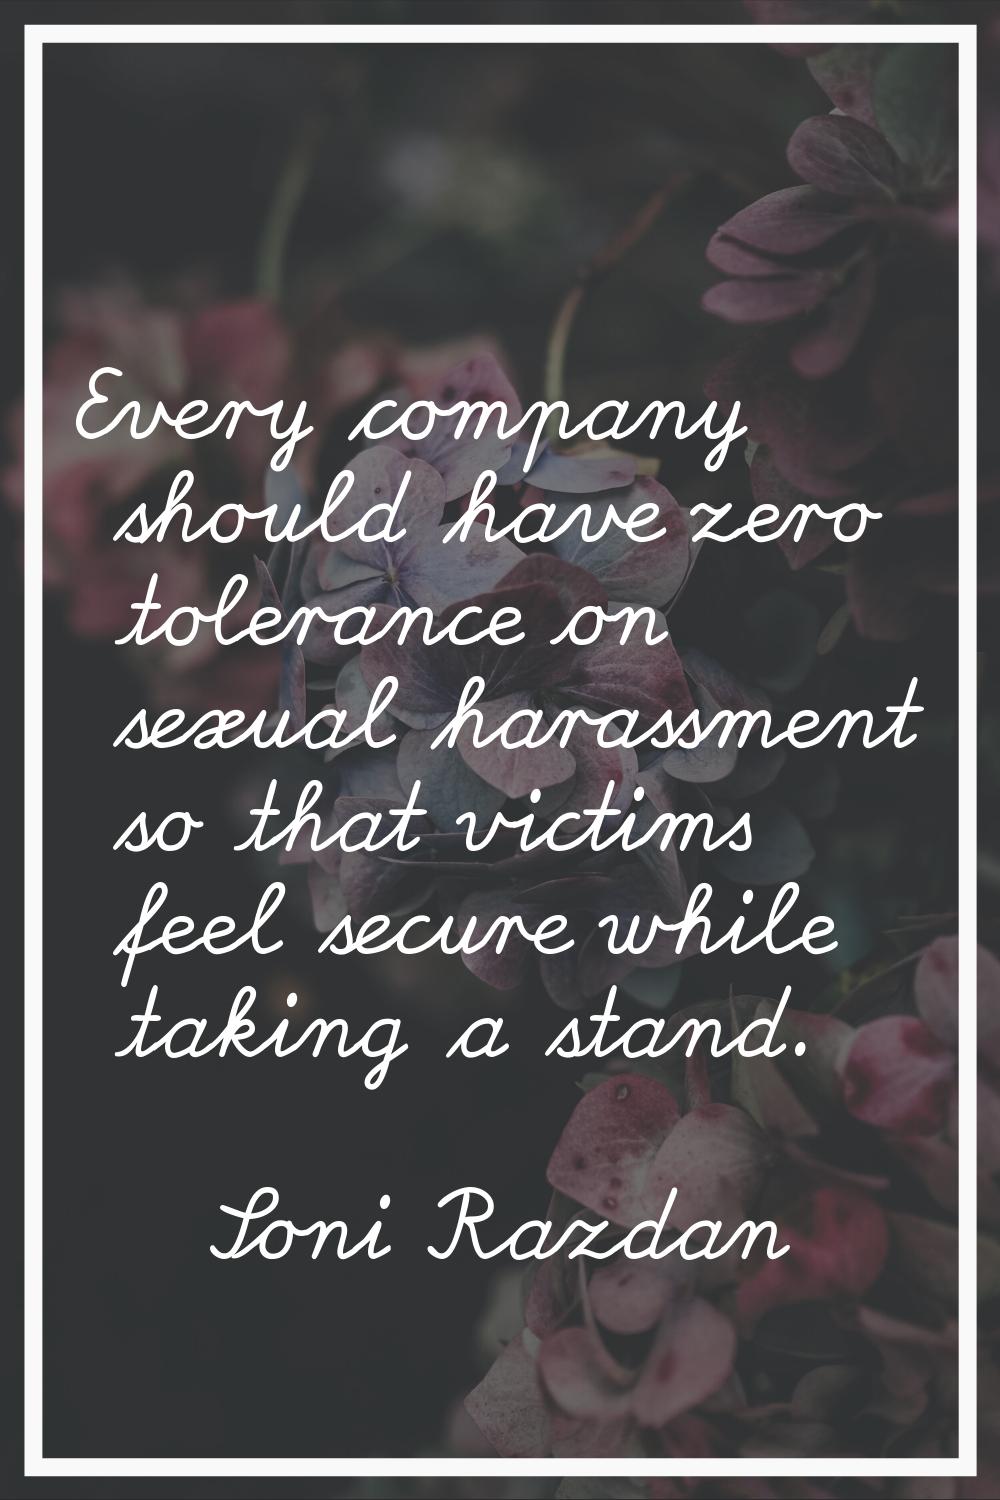 Every company should have zero tolerance on sexual harassment so that victims feel secure while tak